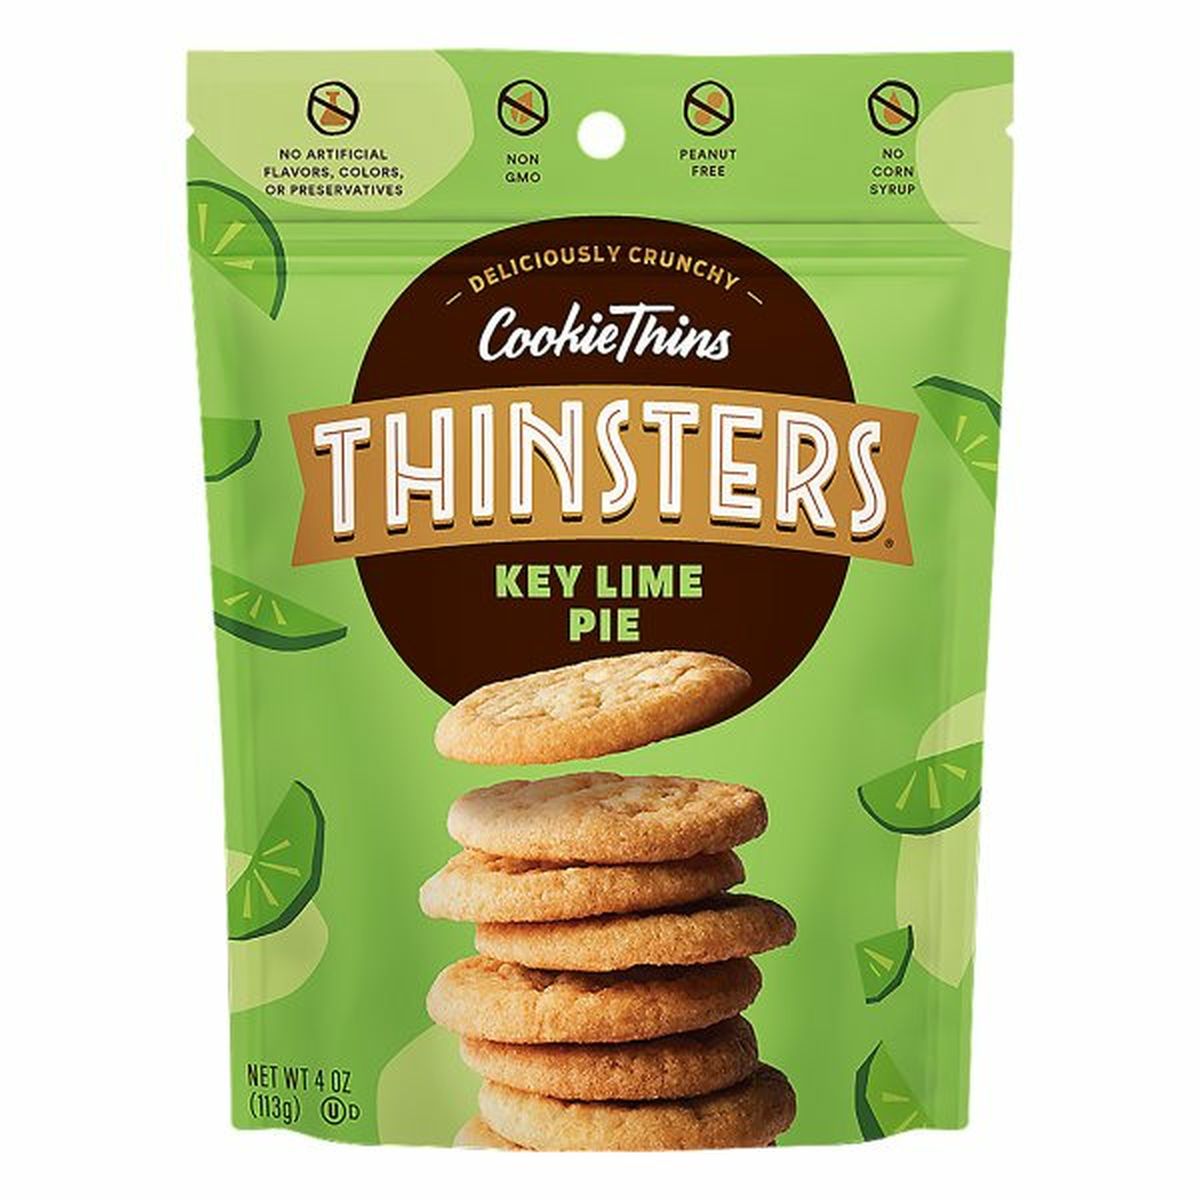 Calories in Thinsters Cookie Thins, Key Lime Pie